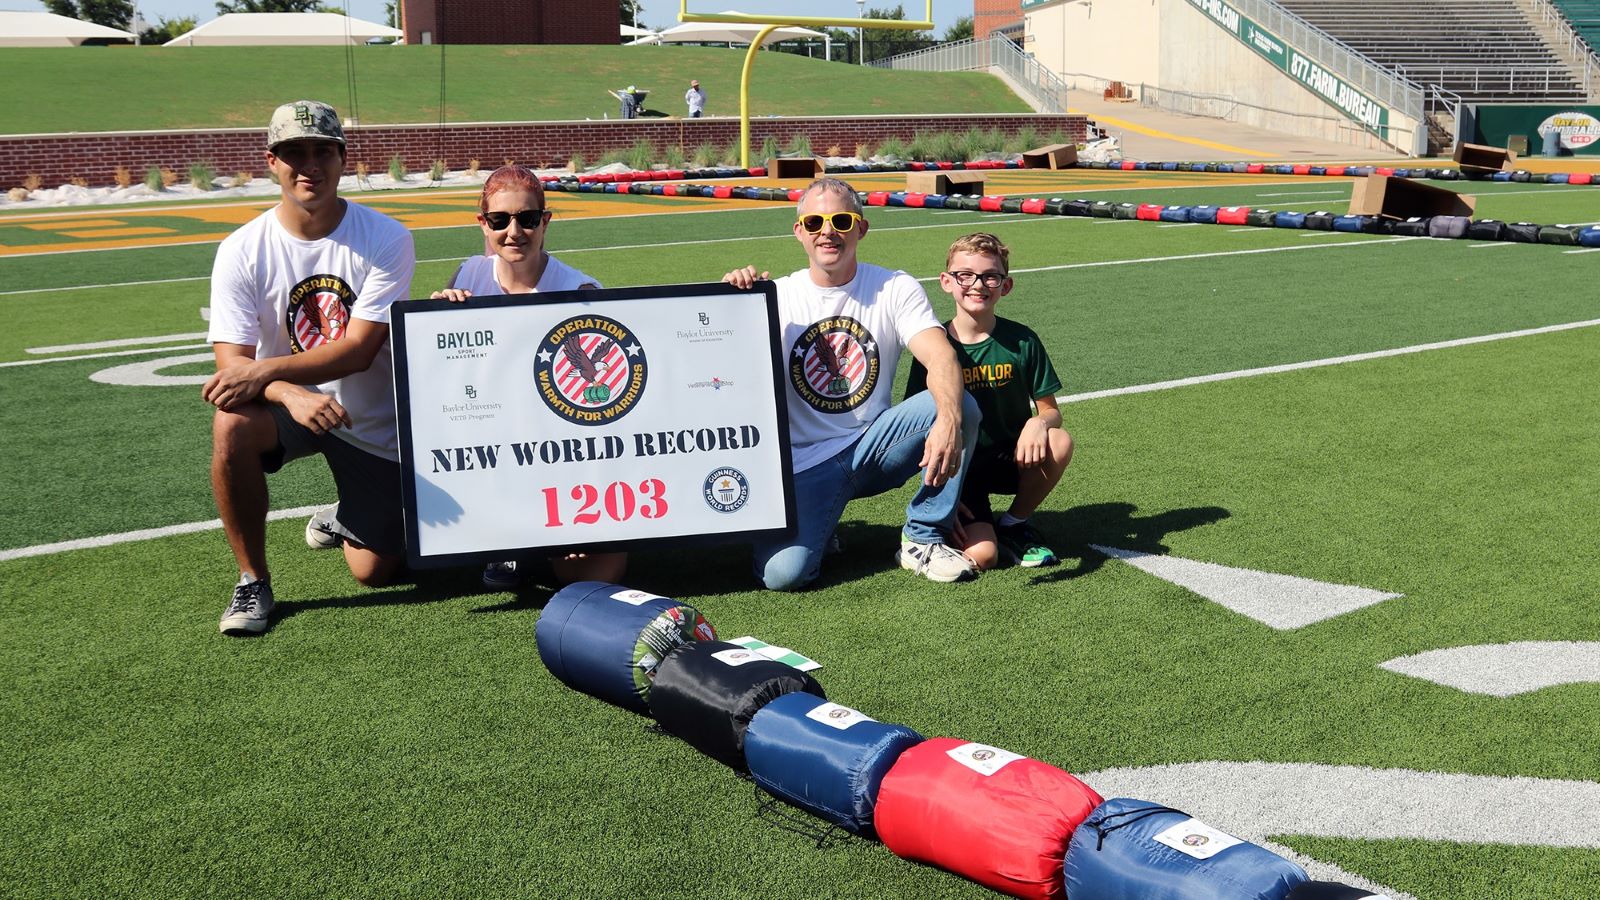 Baylor School of Education students pose with lined up sleeping bags and a world record sign